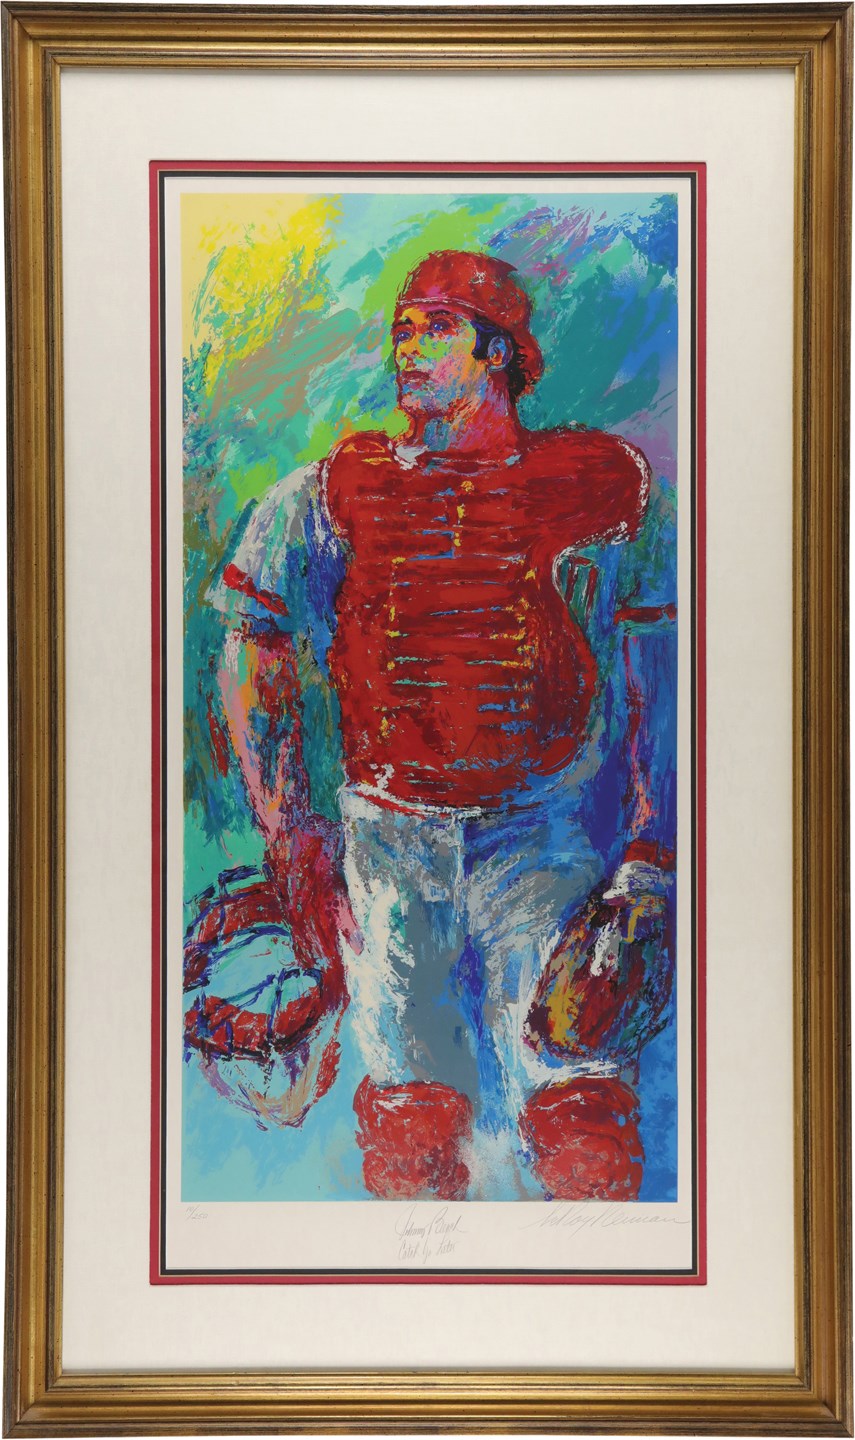 - Johnny Bench Limited Edition Signed Serigraph by LeRoy Neiman (#10/250)